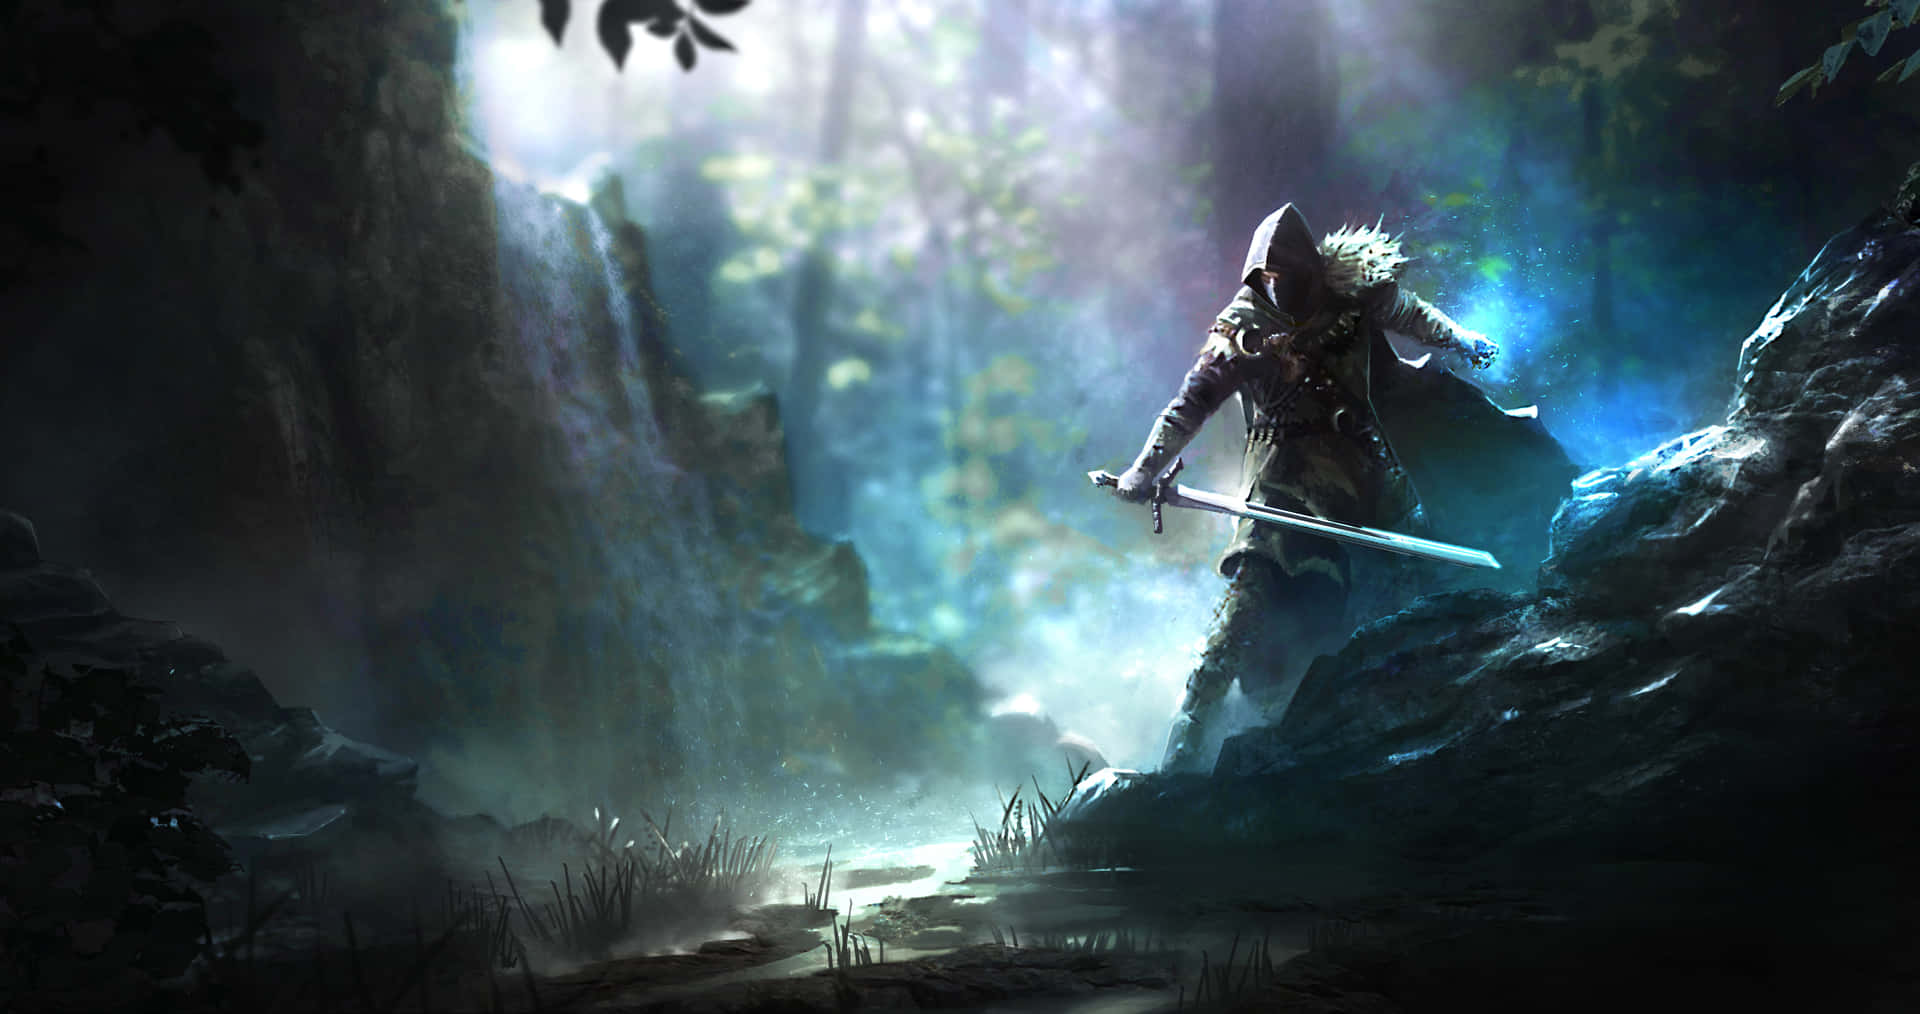 A Man With A Sword Is Standing In A Forest